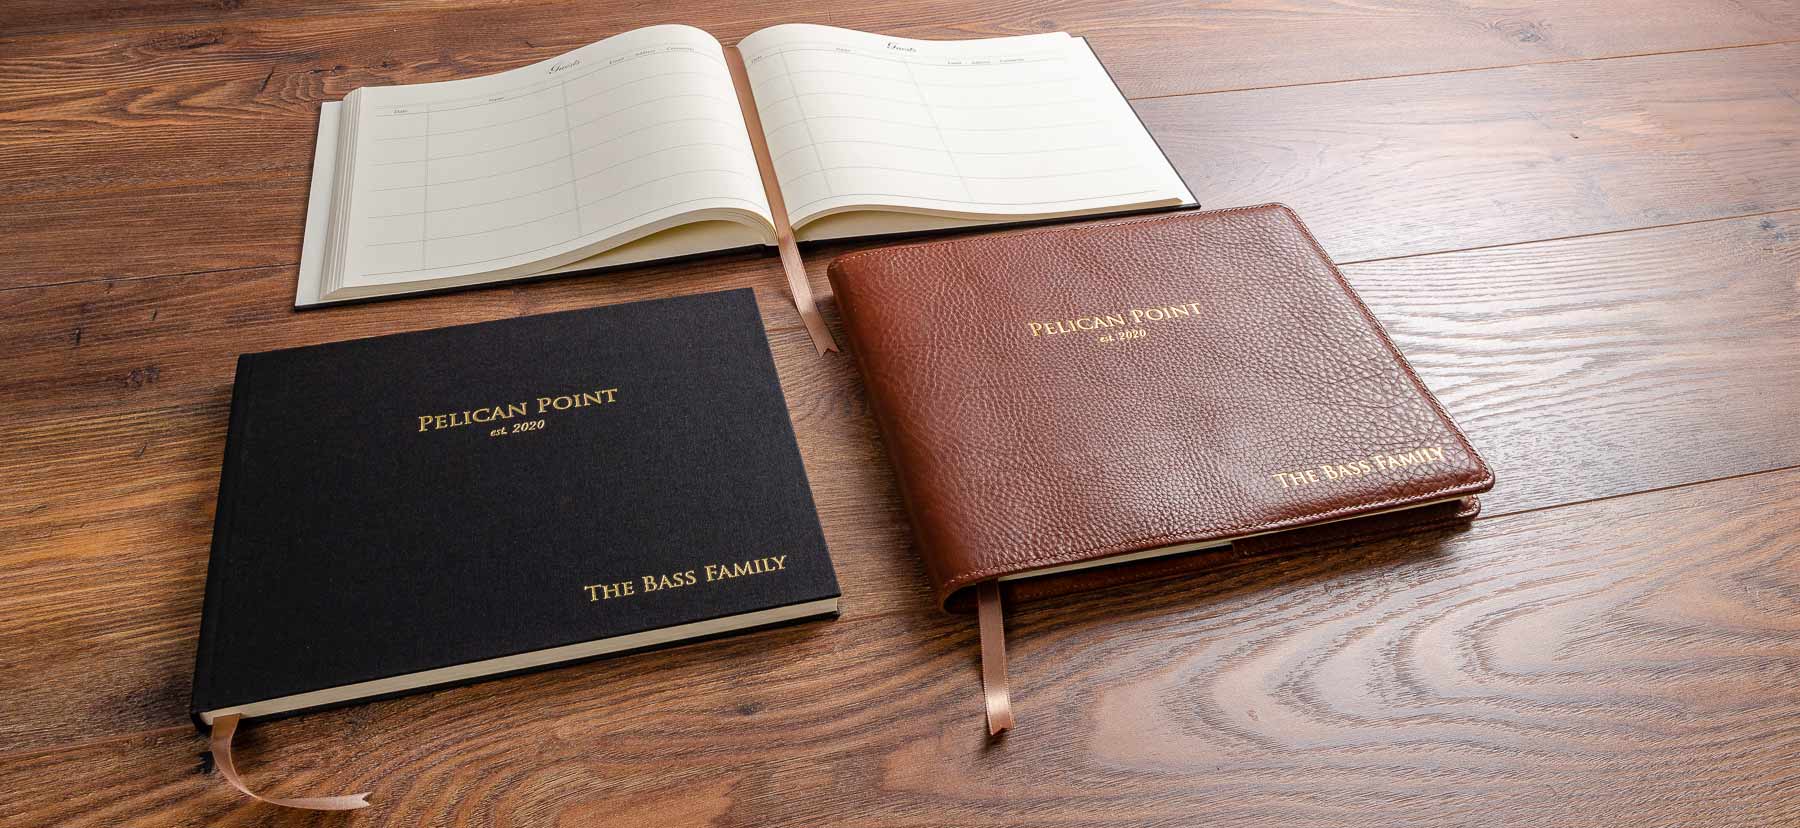 Custom made visitor guest book with personalised cover and leather cover